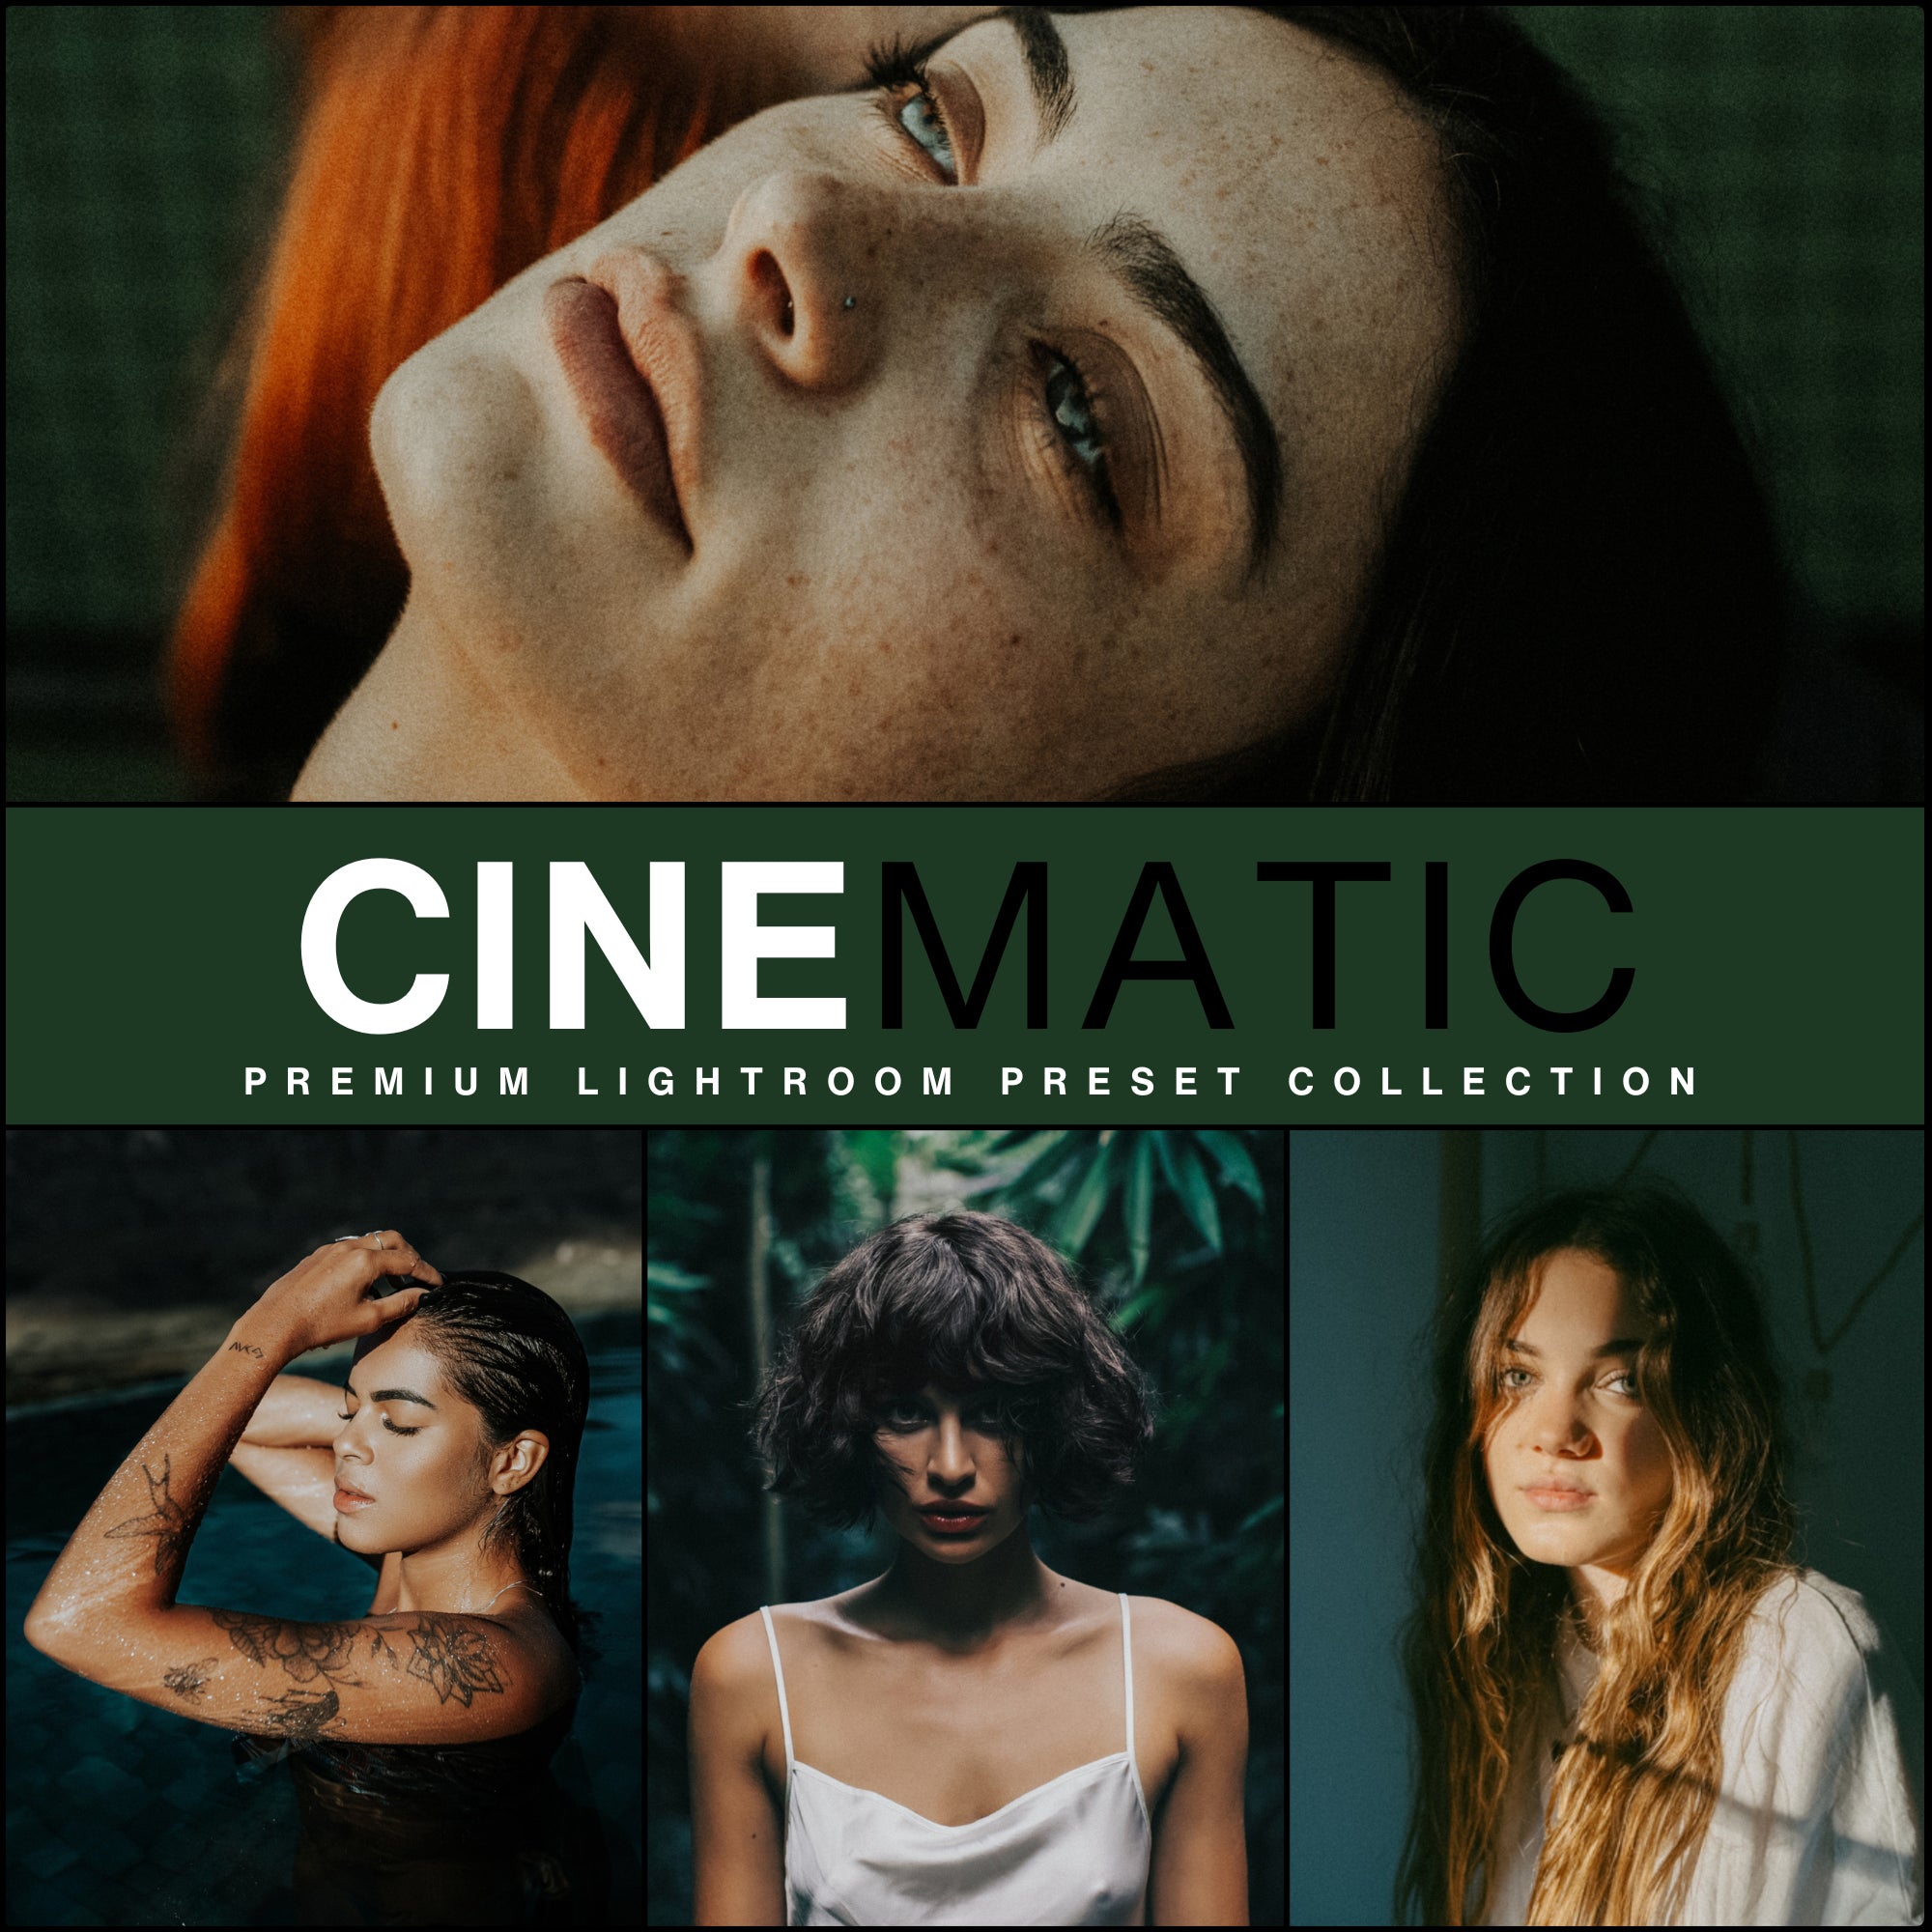 Cinematic Lightroom Presets The Best Film Photo Editing Preset Filters For An Analog Vintage Retro Film Look With Lightroom Mobile And Desktop For Photographers and Instagram Influencers By Lou And Marks Presets